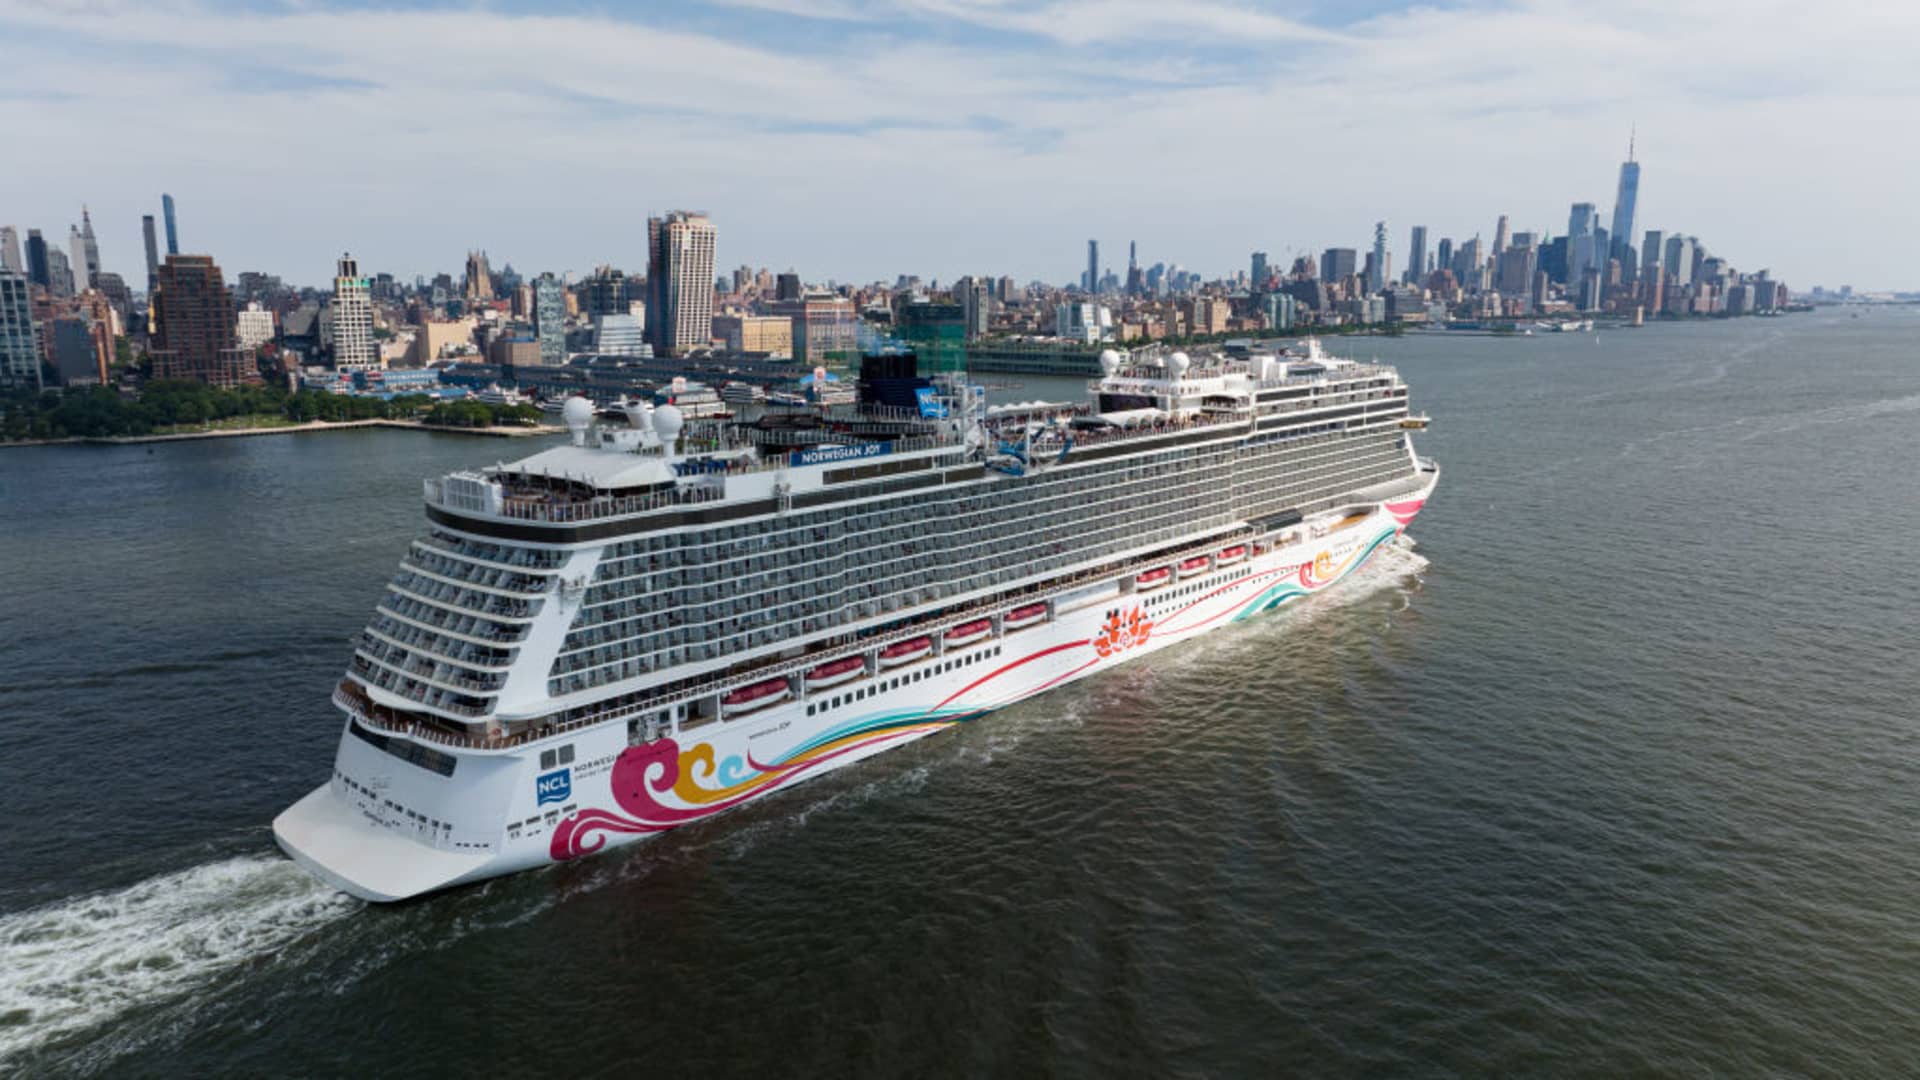 Shares of cruise lines are rising after the CDC terminates the Covid-19 program